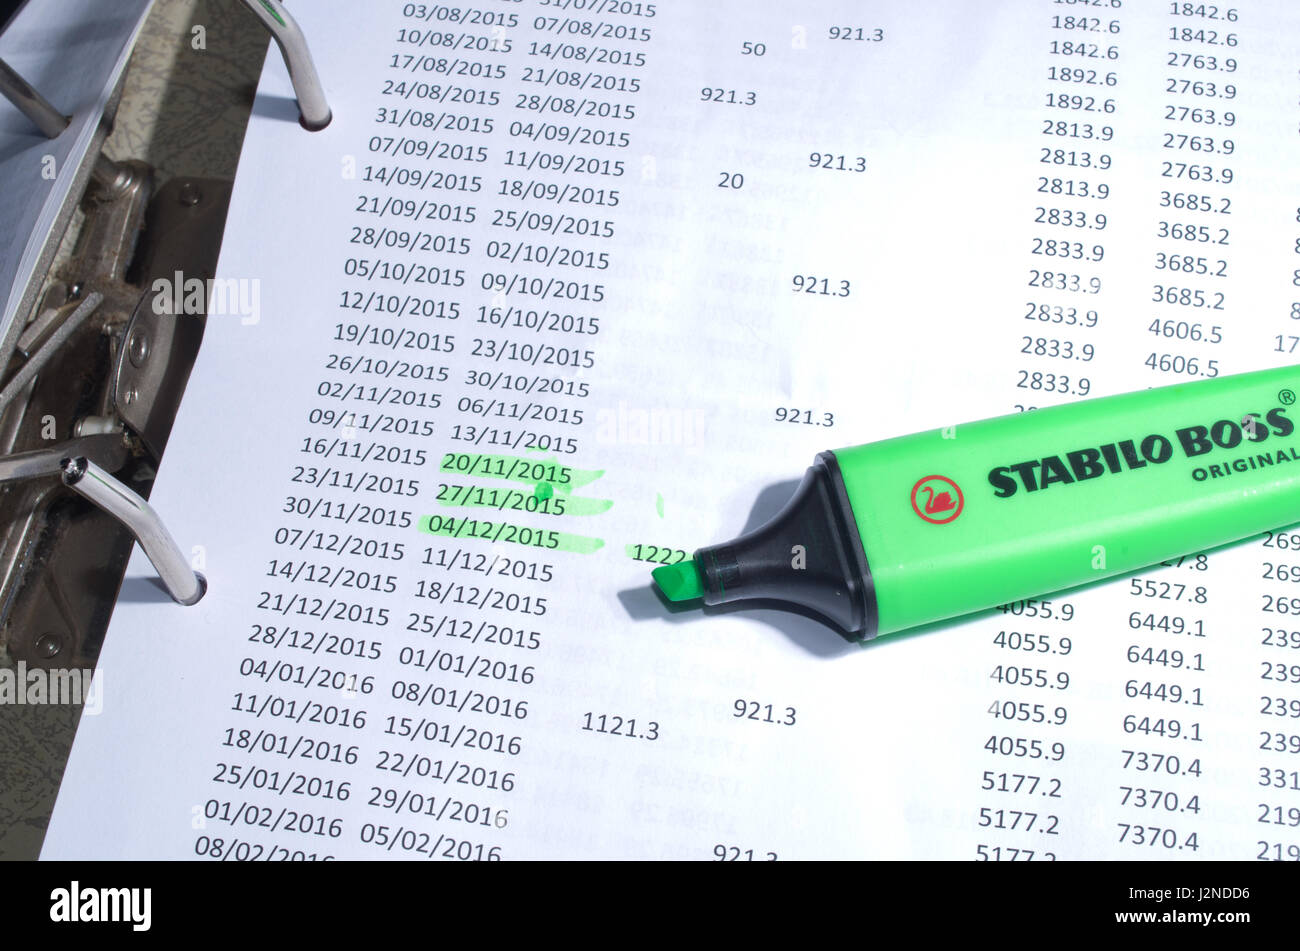 Highlighter Pen Figures numbers on Spread Sheet Filing Stock Photo